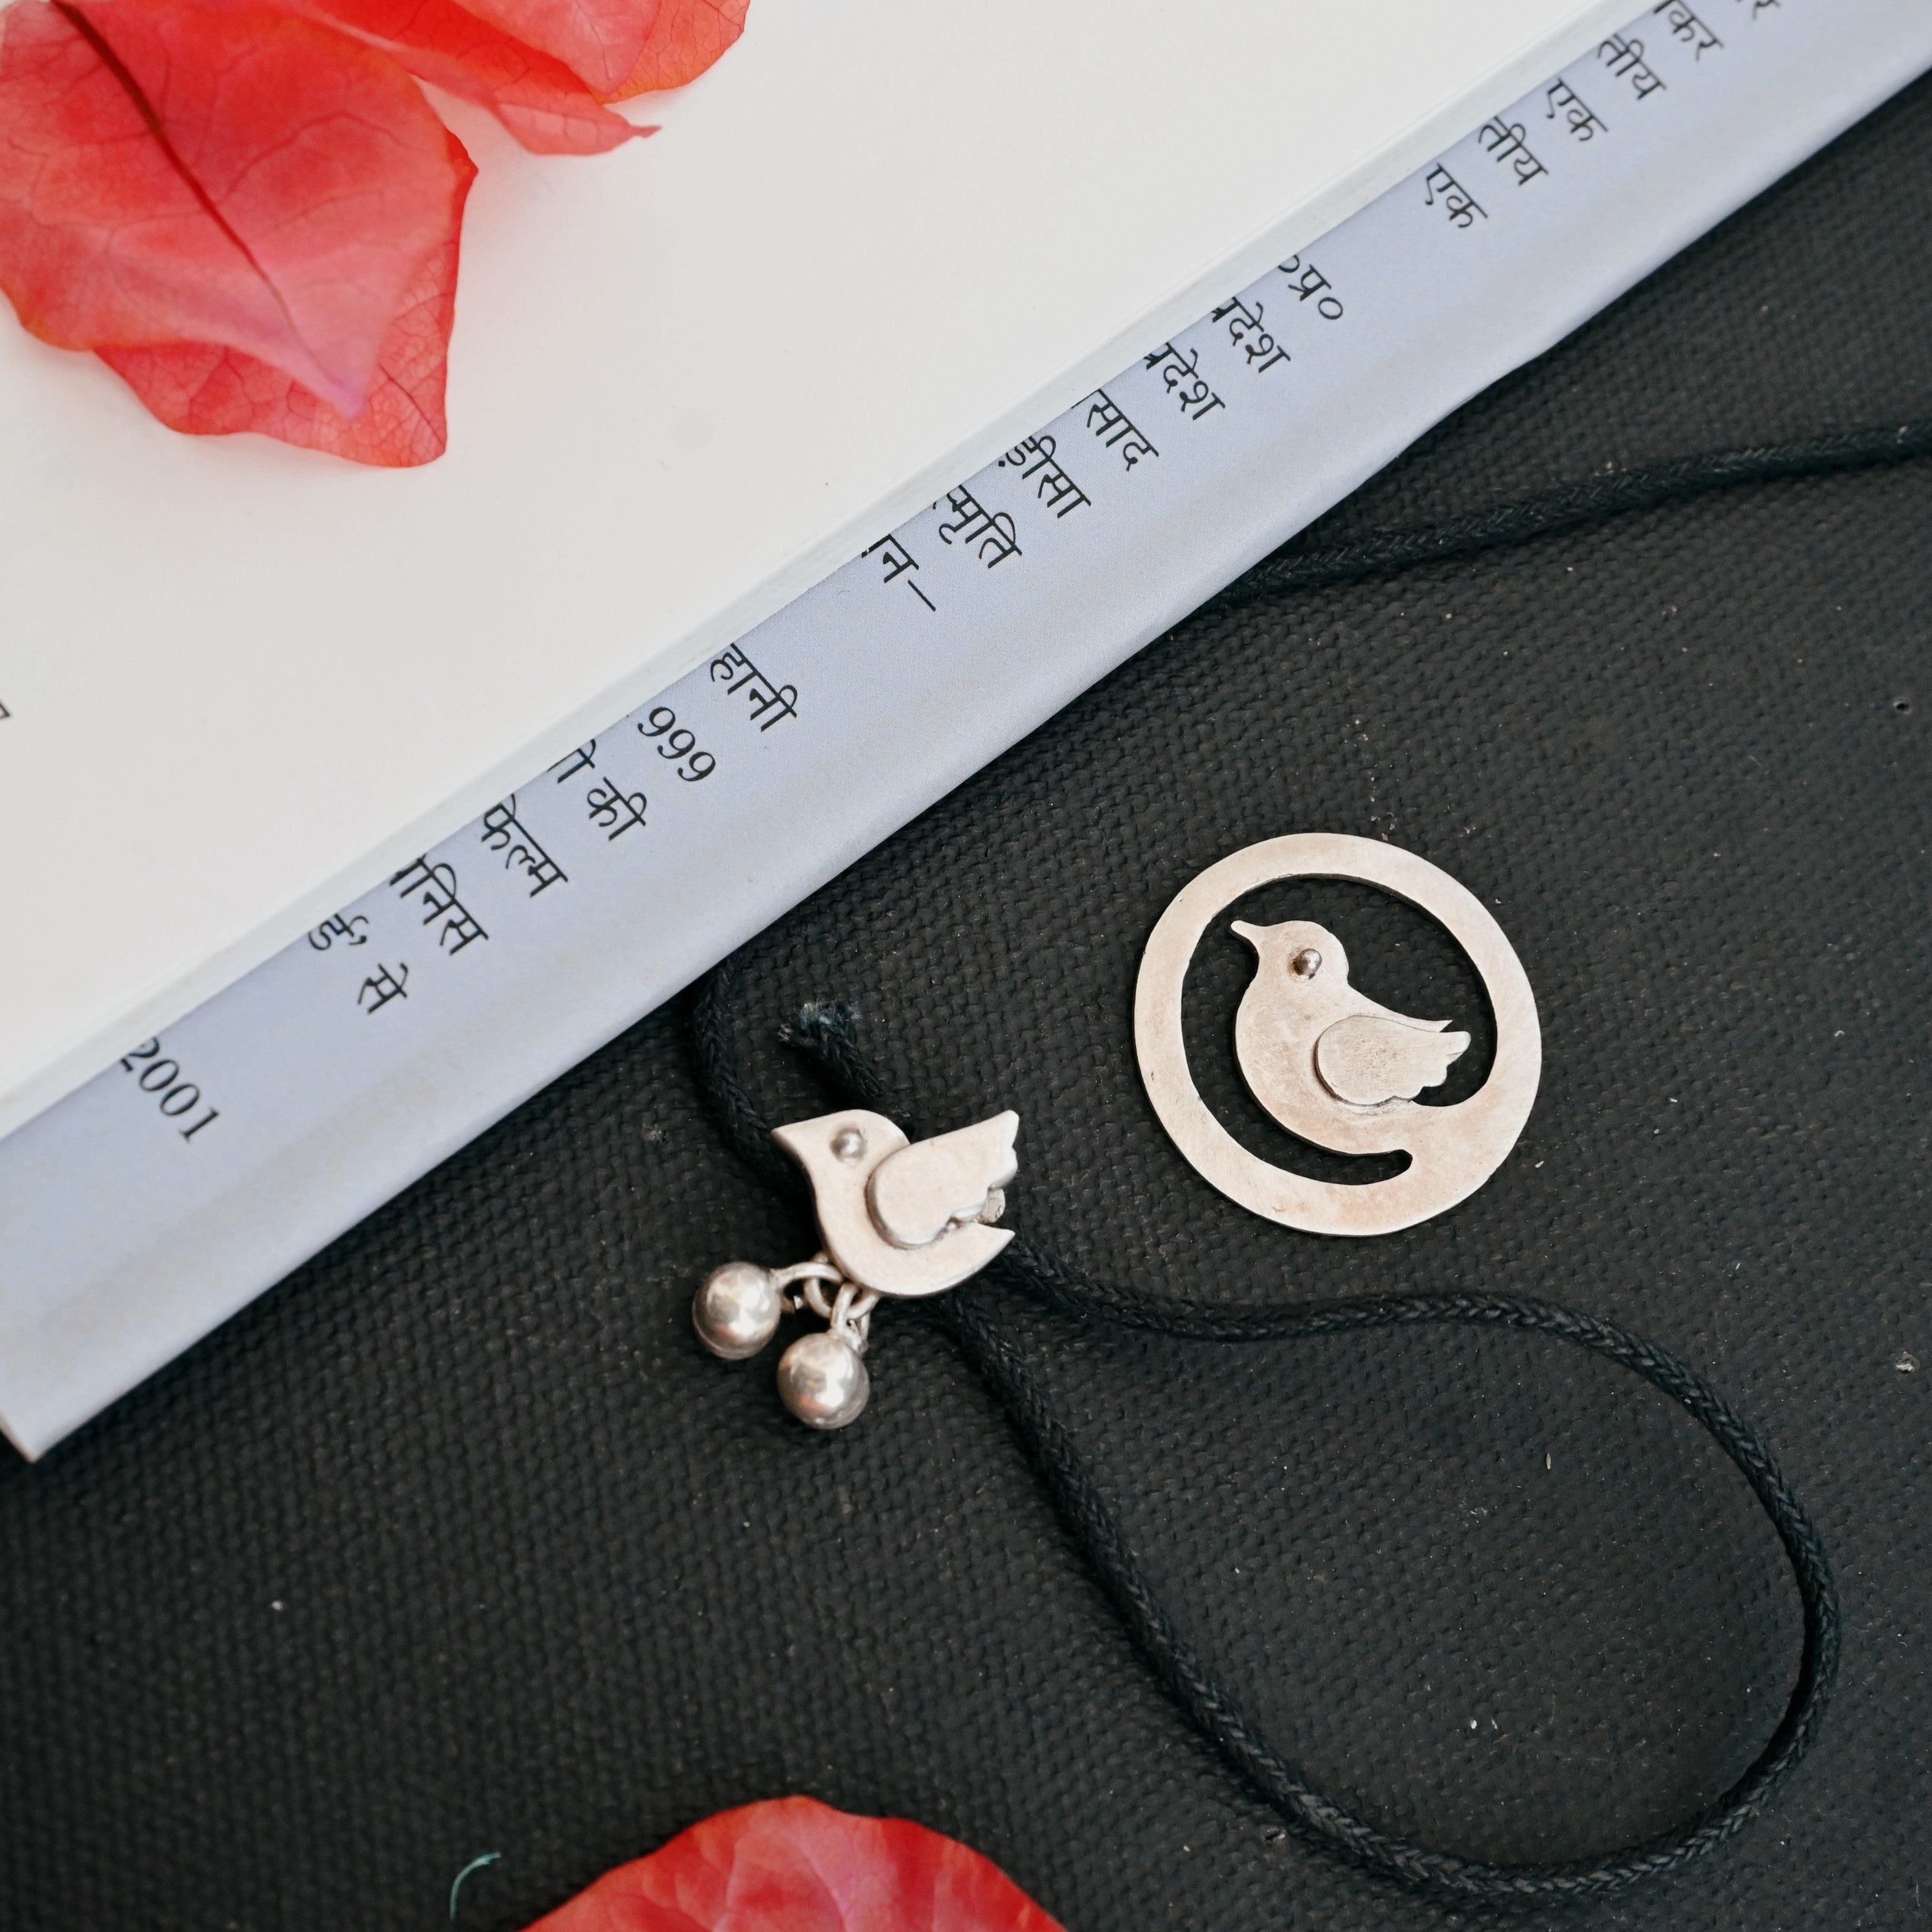 Express love with Quirksmith's Lovebirds - A top valentine's gift! Handcrafted in 92.5 Silver.